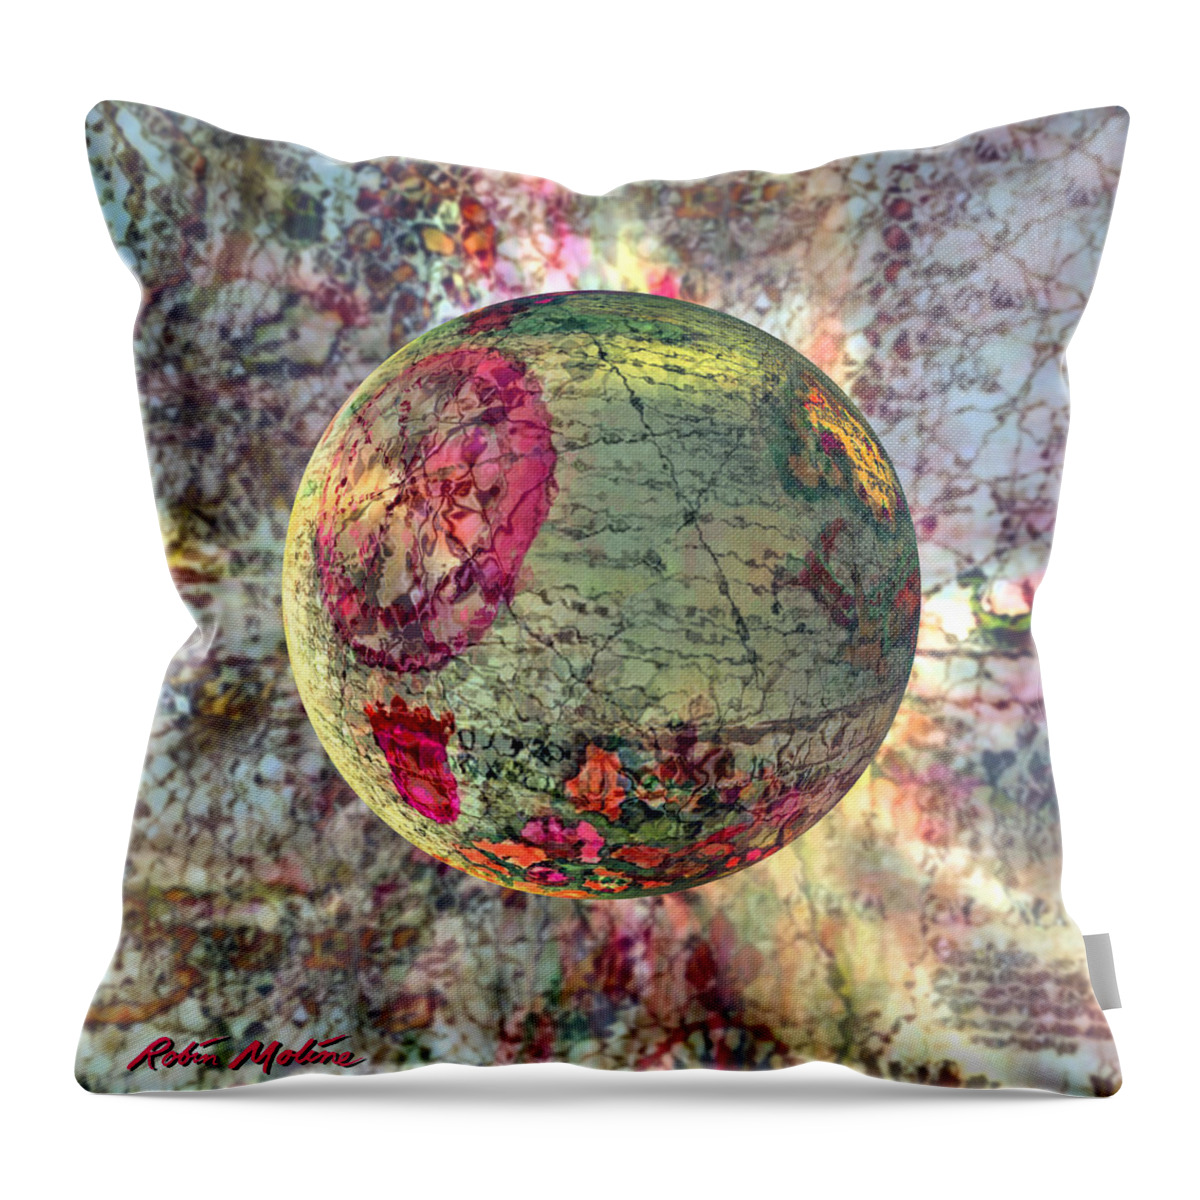 Old World Maps Throw Pillow featuring the painting Old World Poppling by Robin Moline